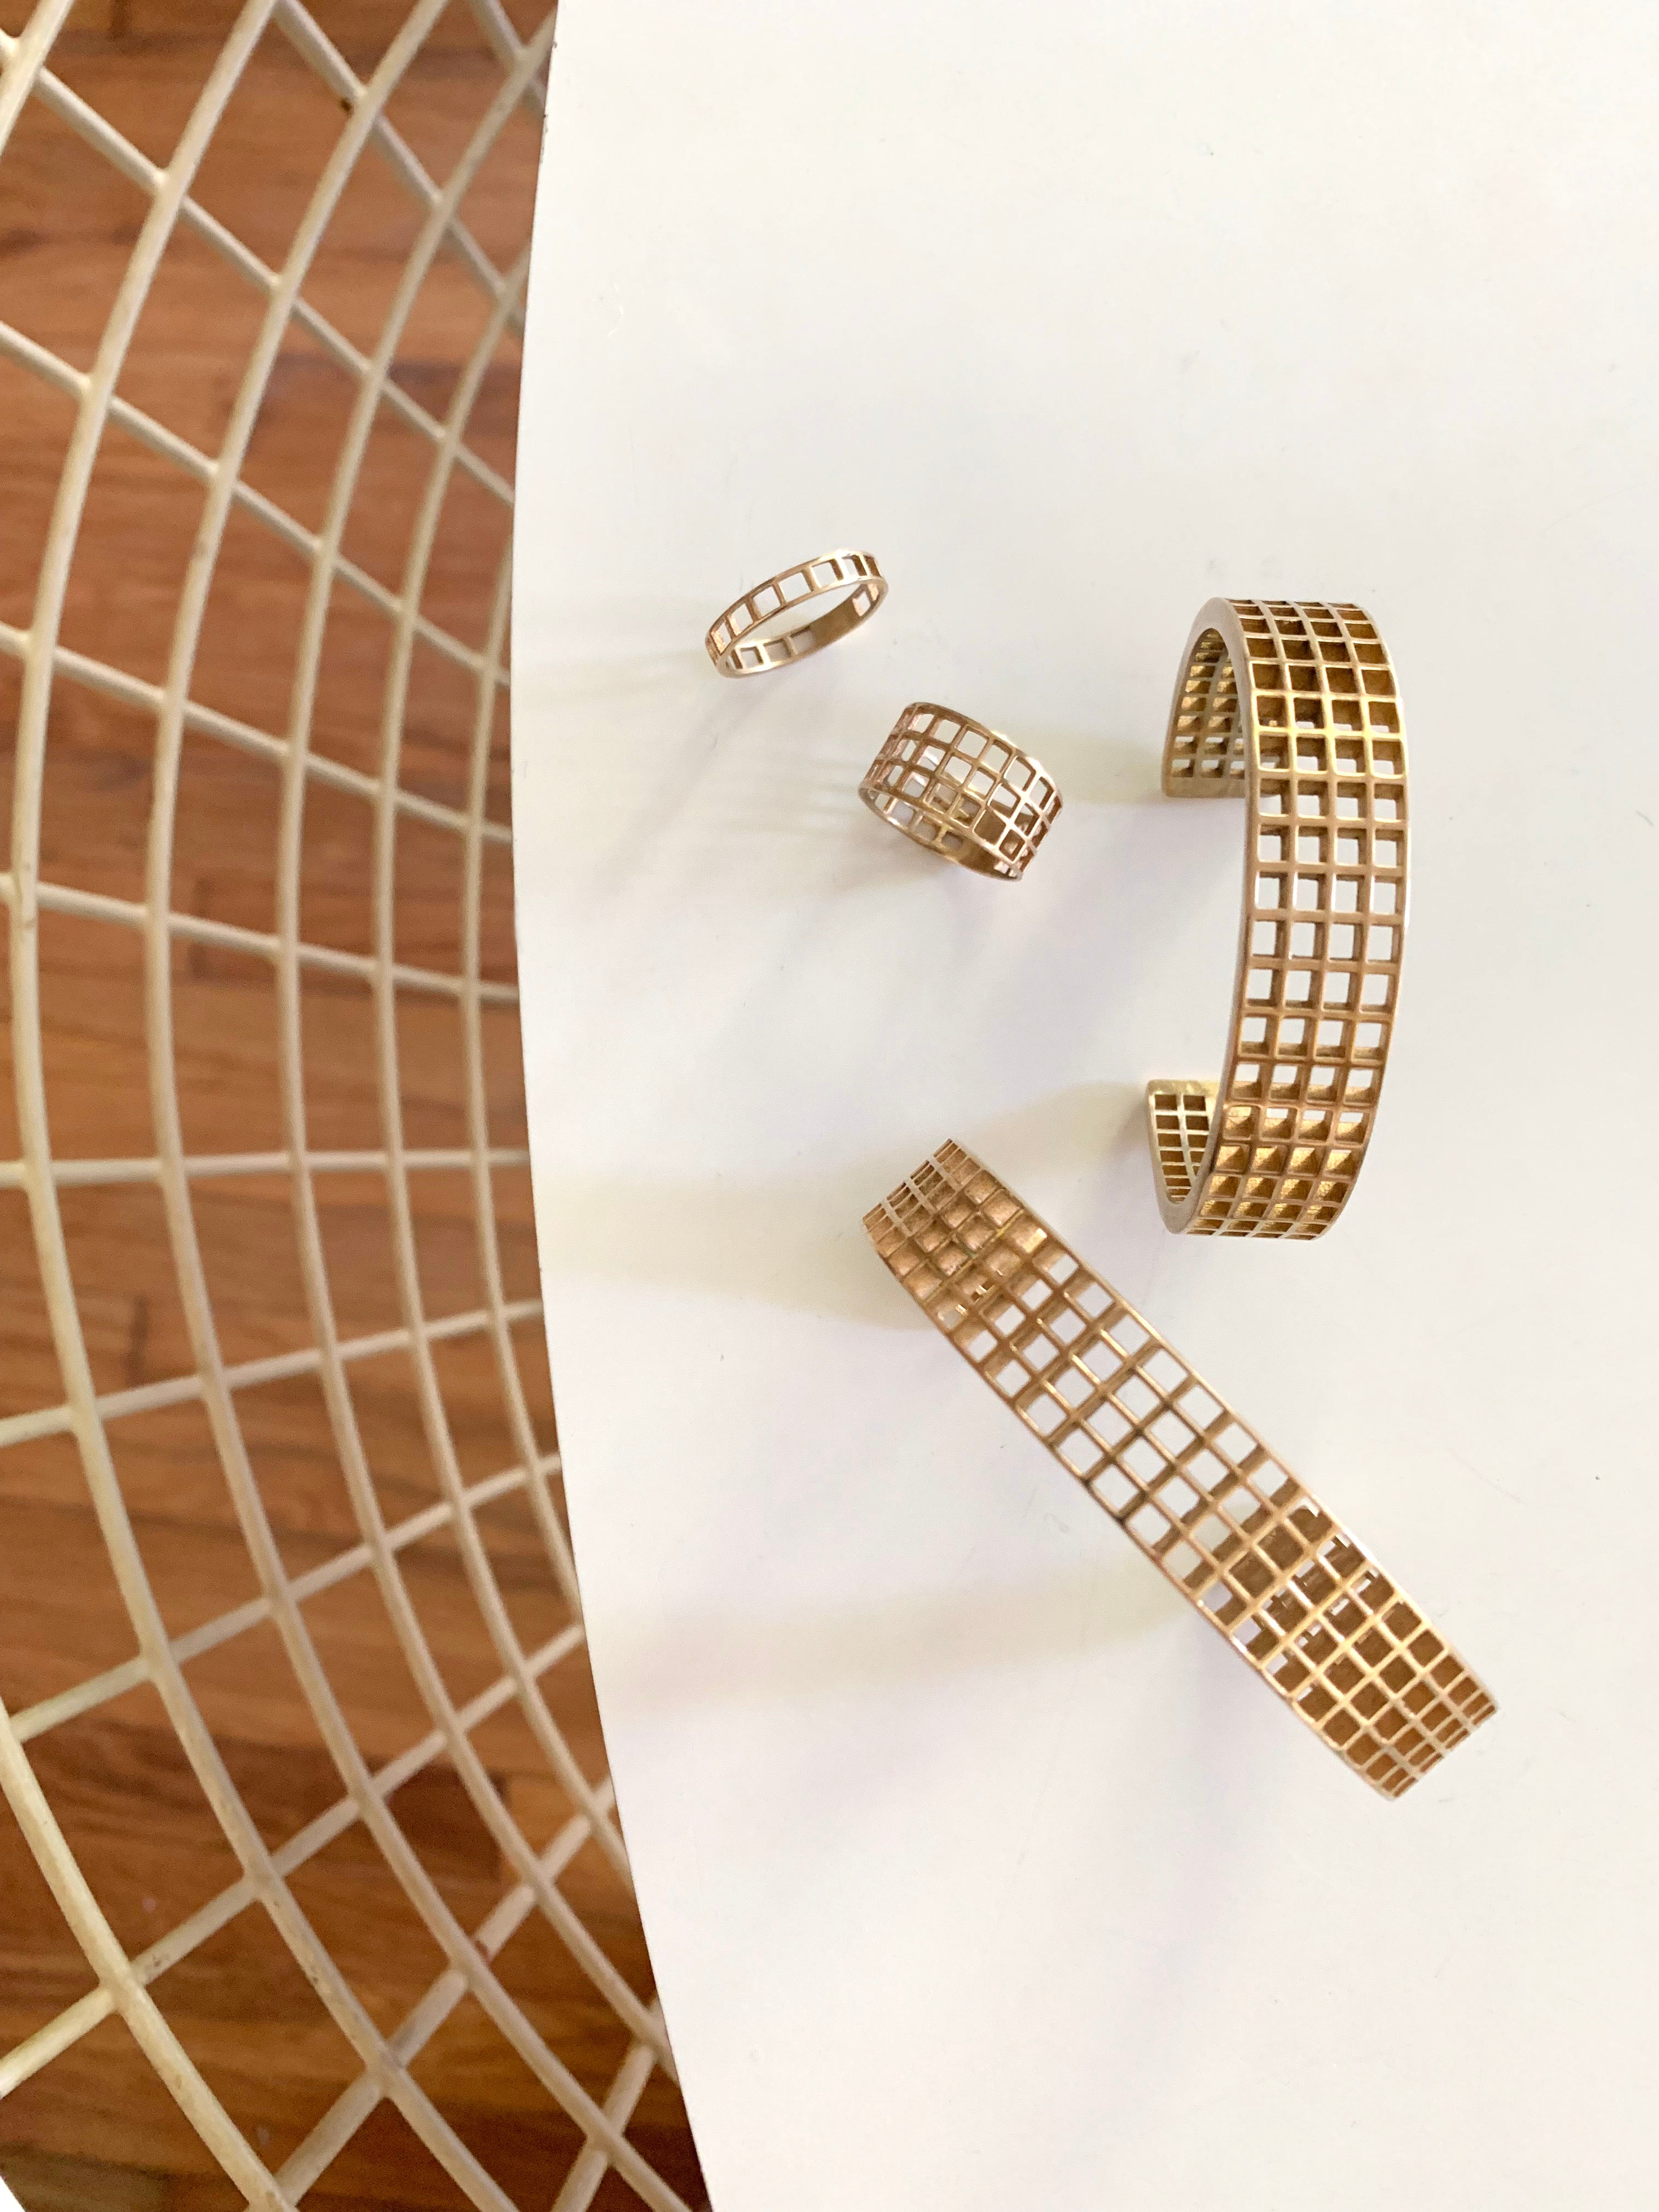 Mimosa Handcrafted's Bronze Grid Pattern Jewelry Is Displayed On A White Table